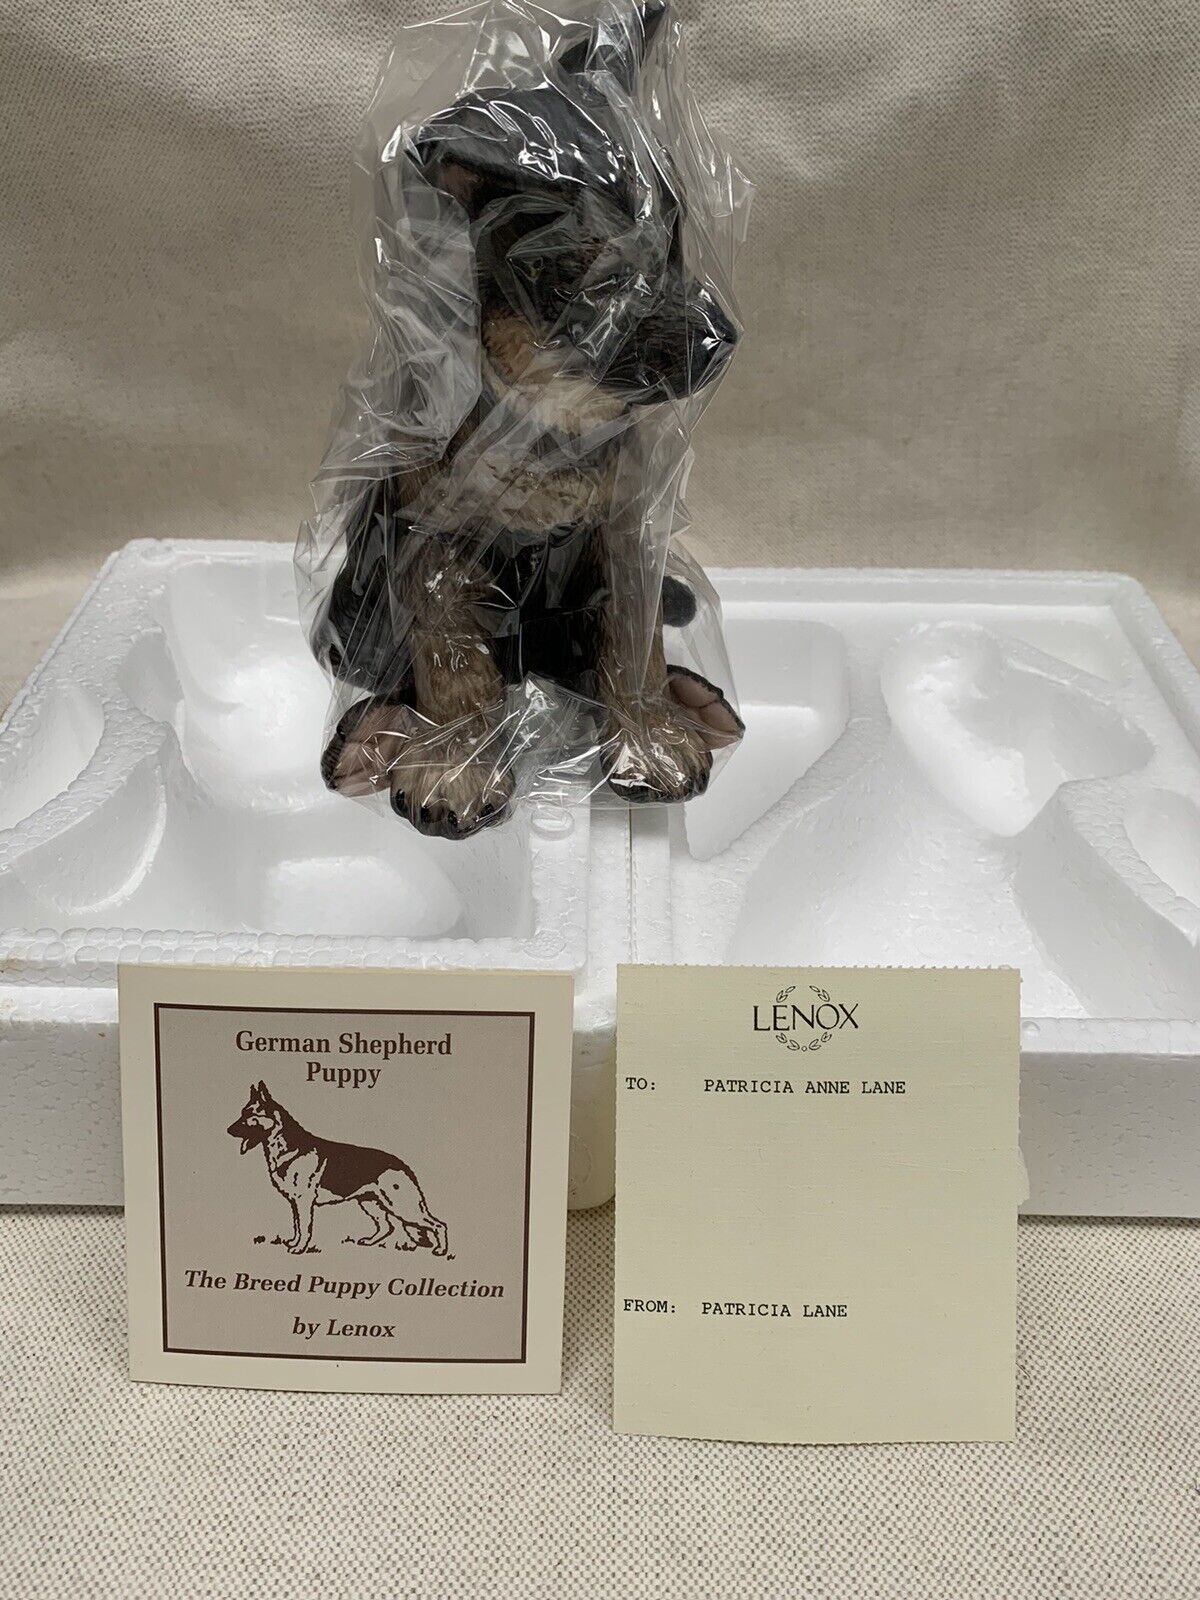 Lenox German Shepherd Puppy Porcelain Figurine The Breed Puppy Collection